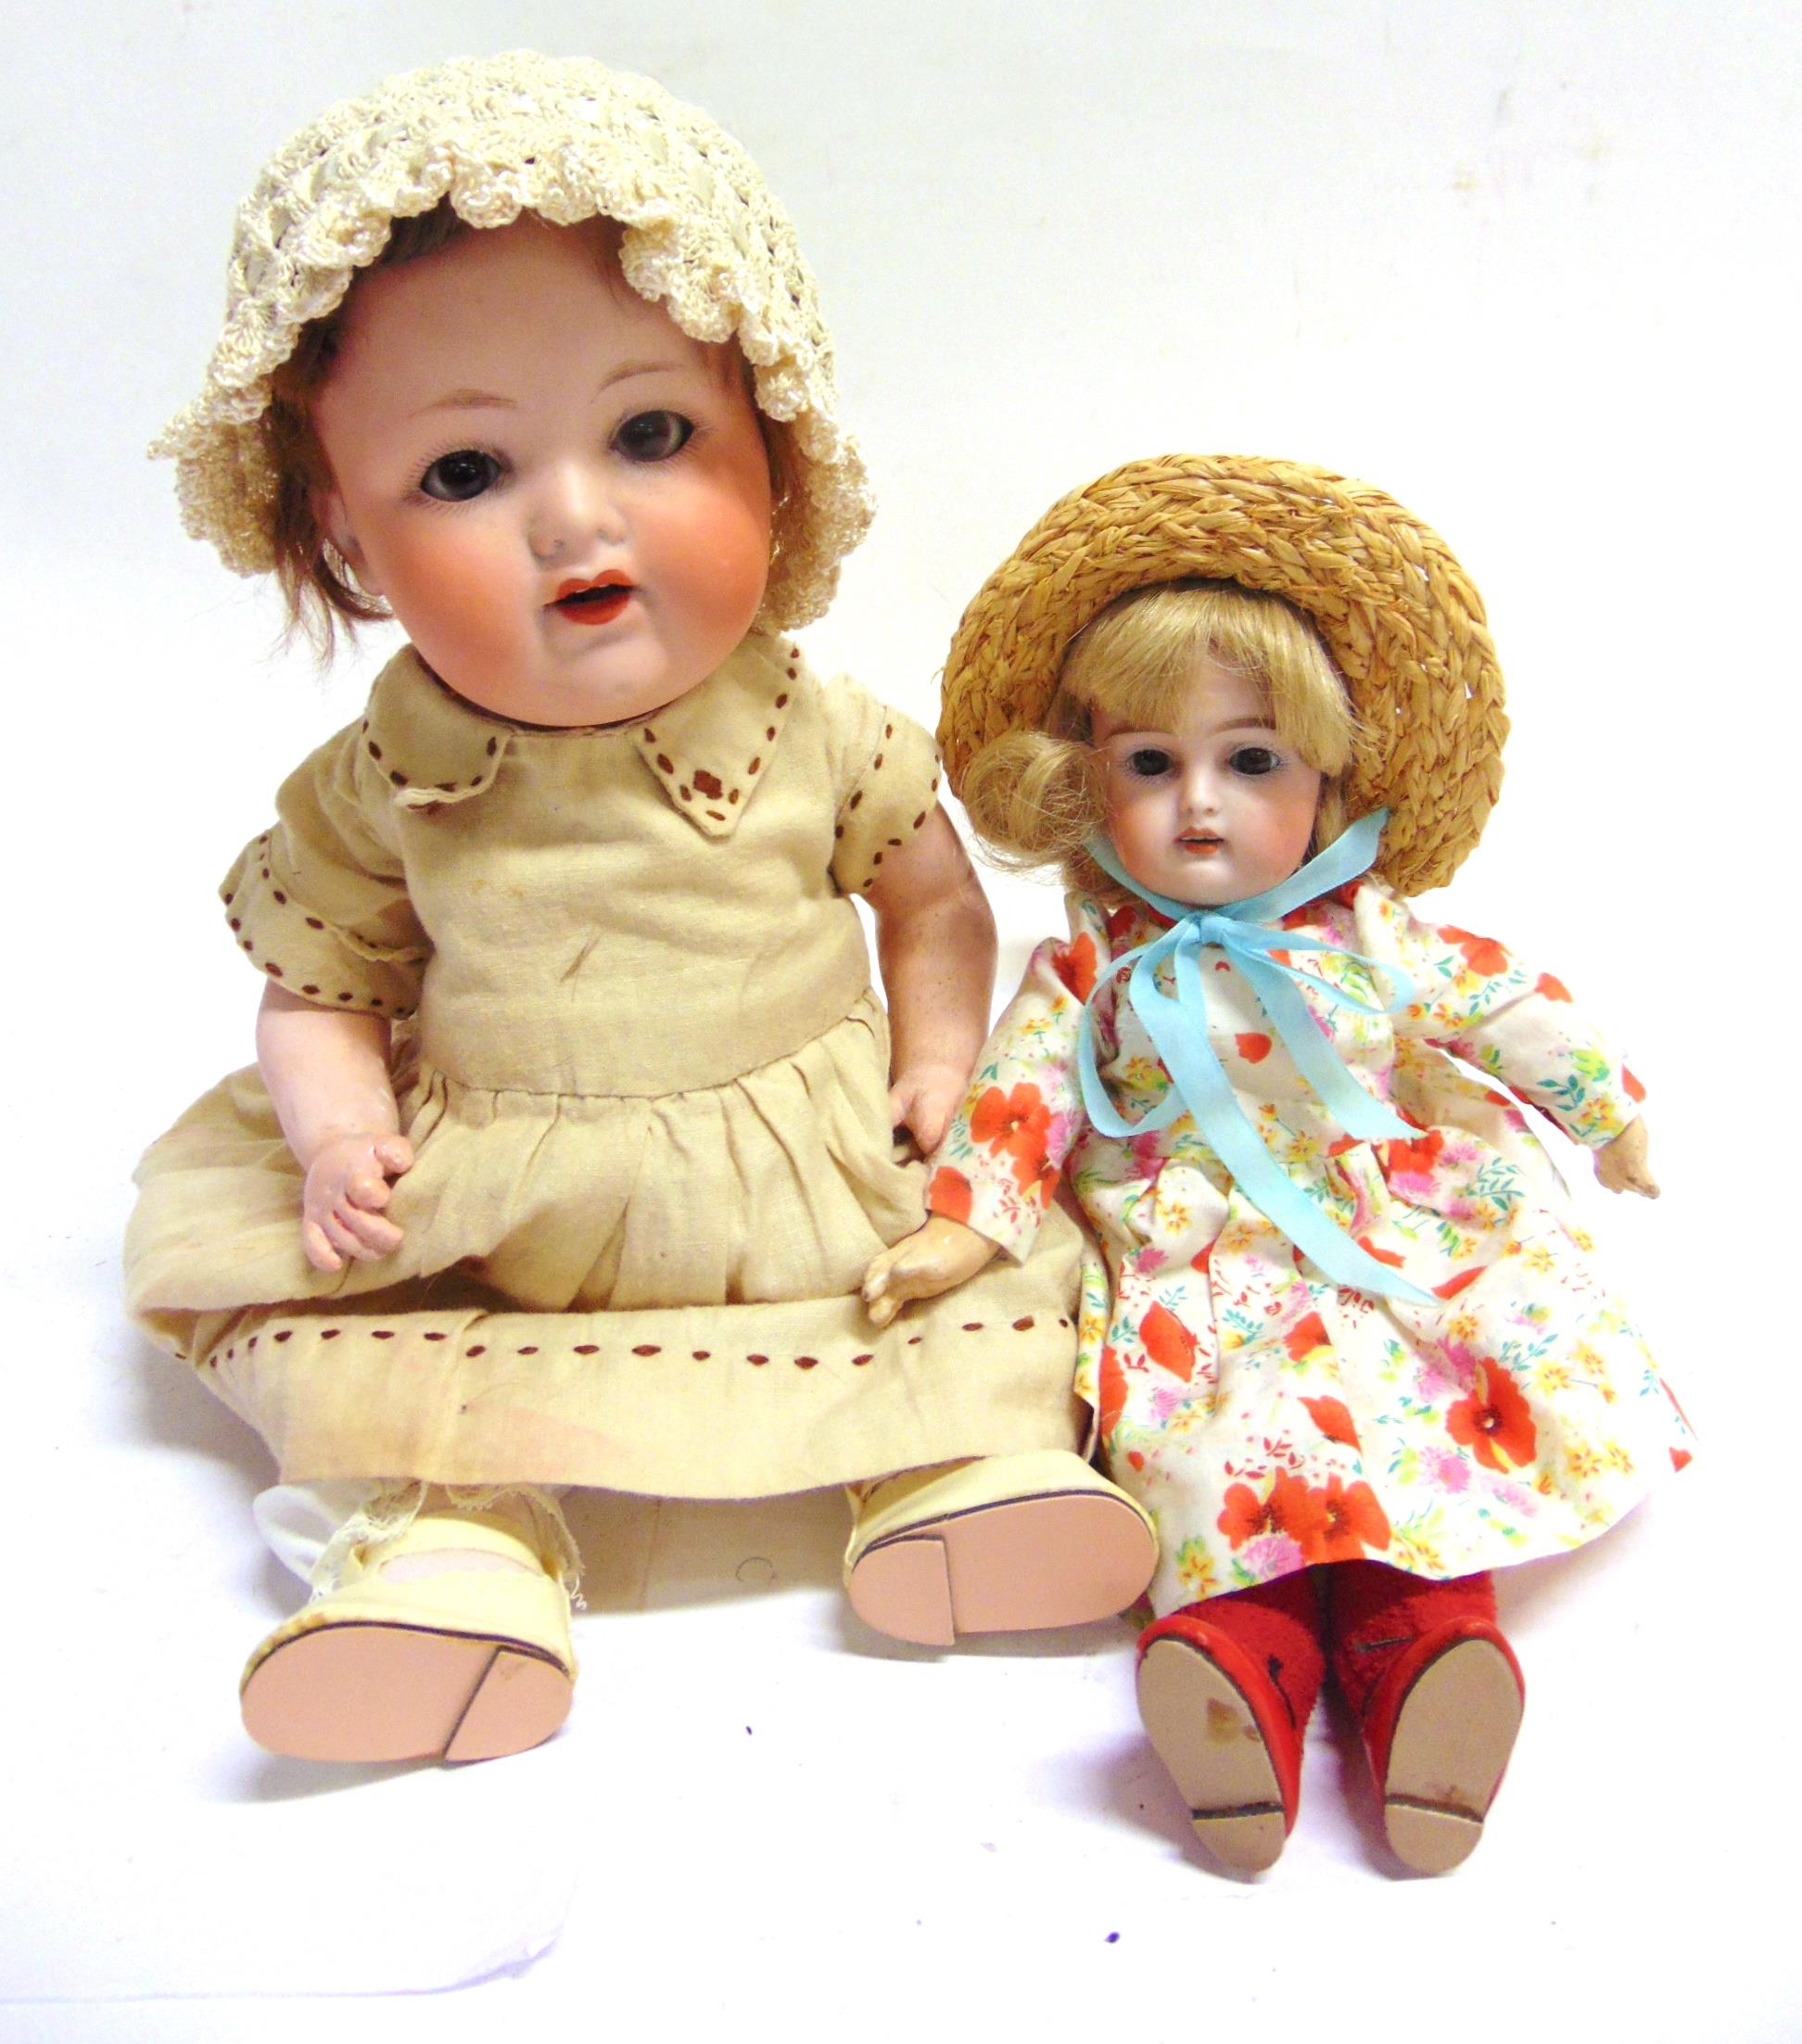 TWO BISQUE DOLLS comprising an Armand Marseille bisque socket head doll, with a cropped brown wig,